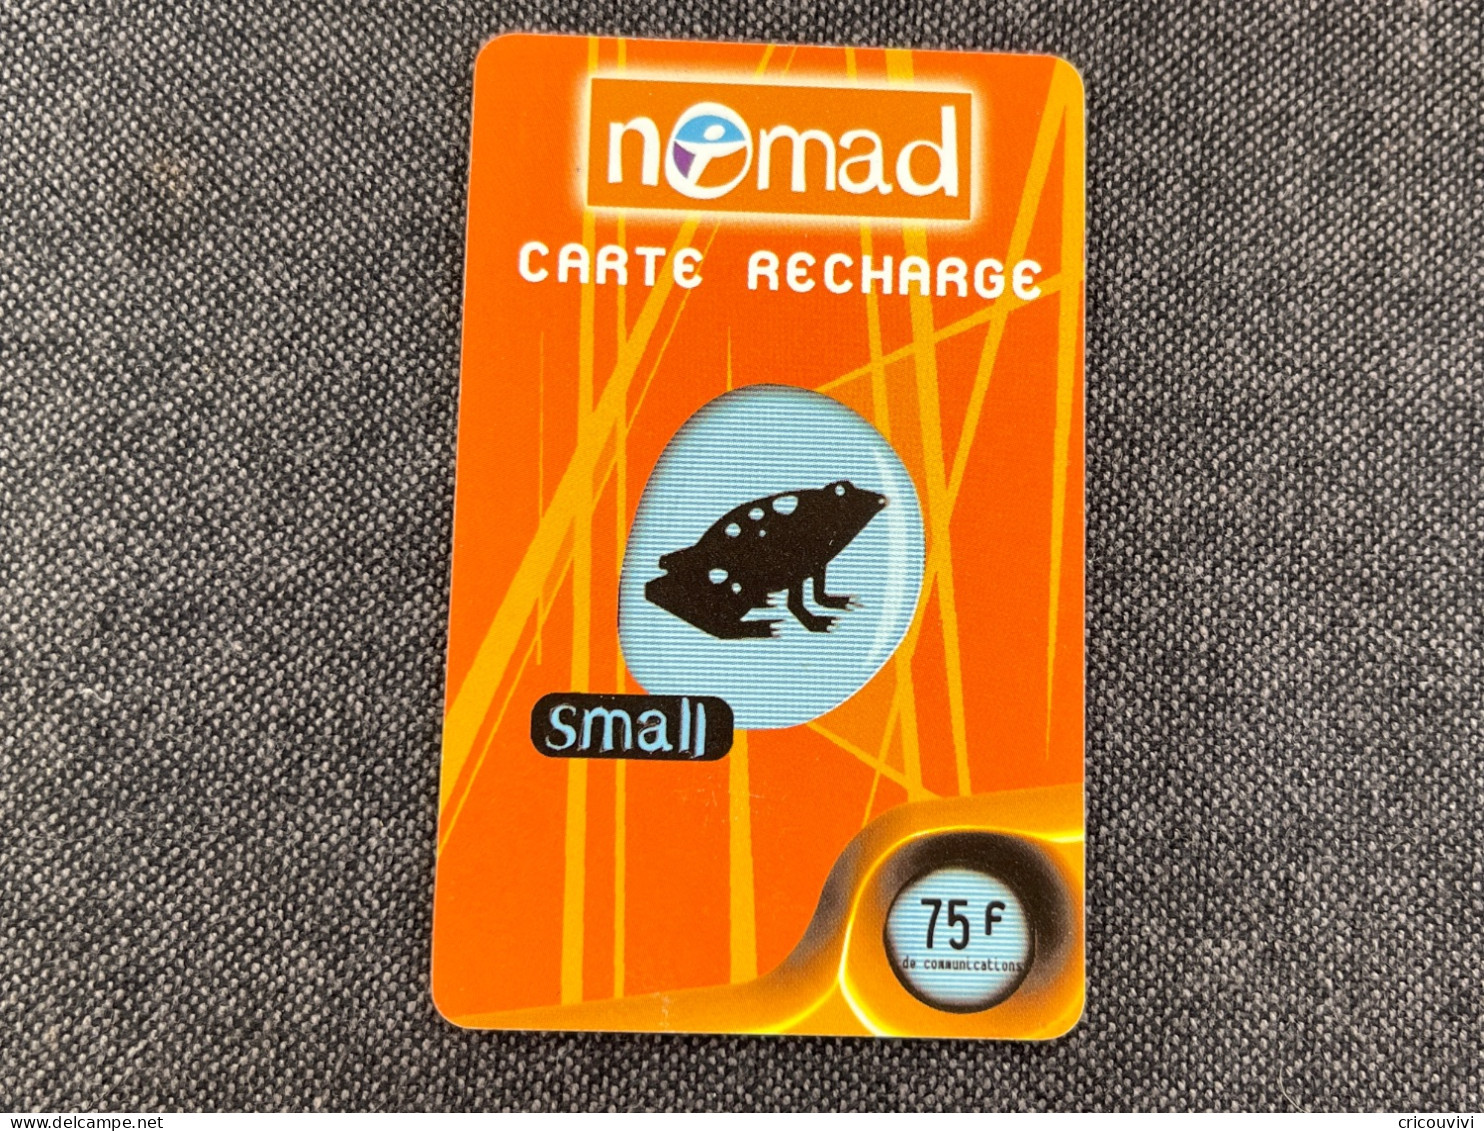 Nomad / Bouygues Pu2a - Cellphone Cards (refills)